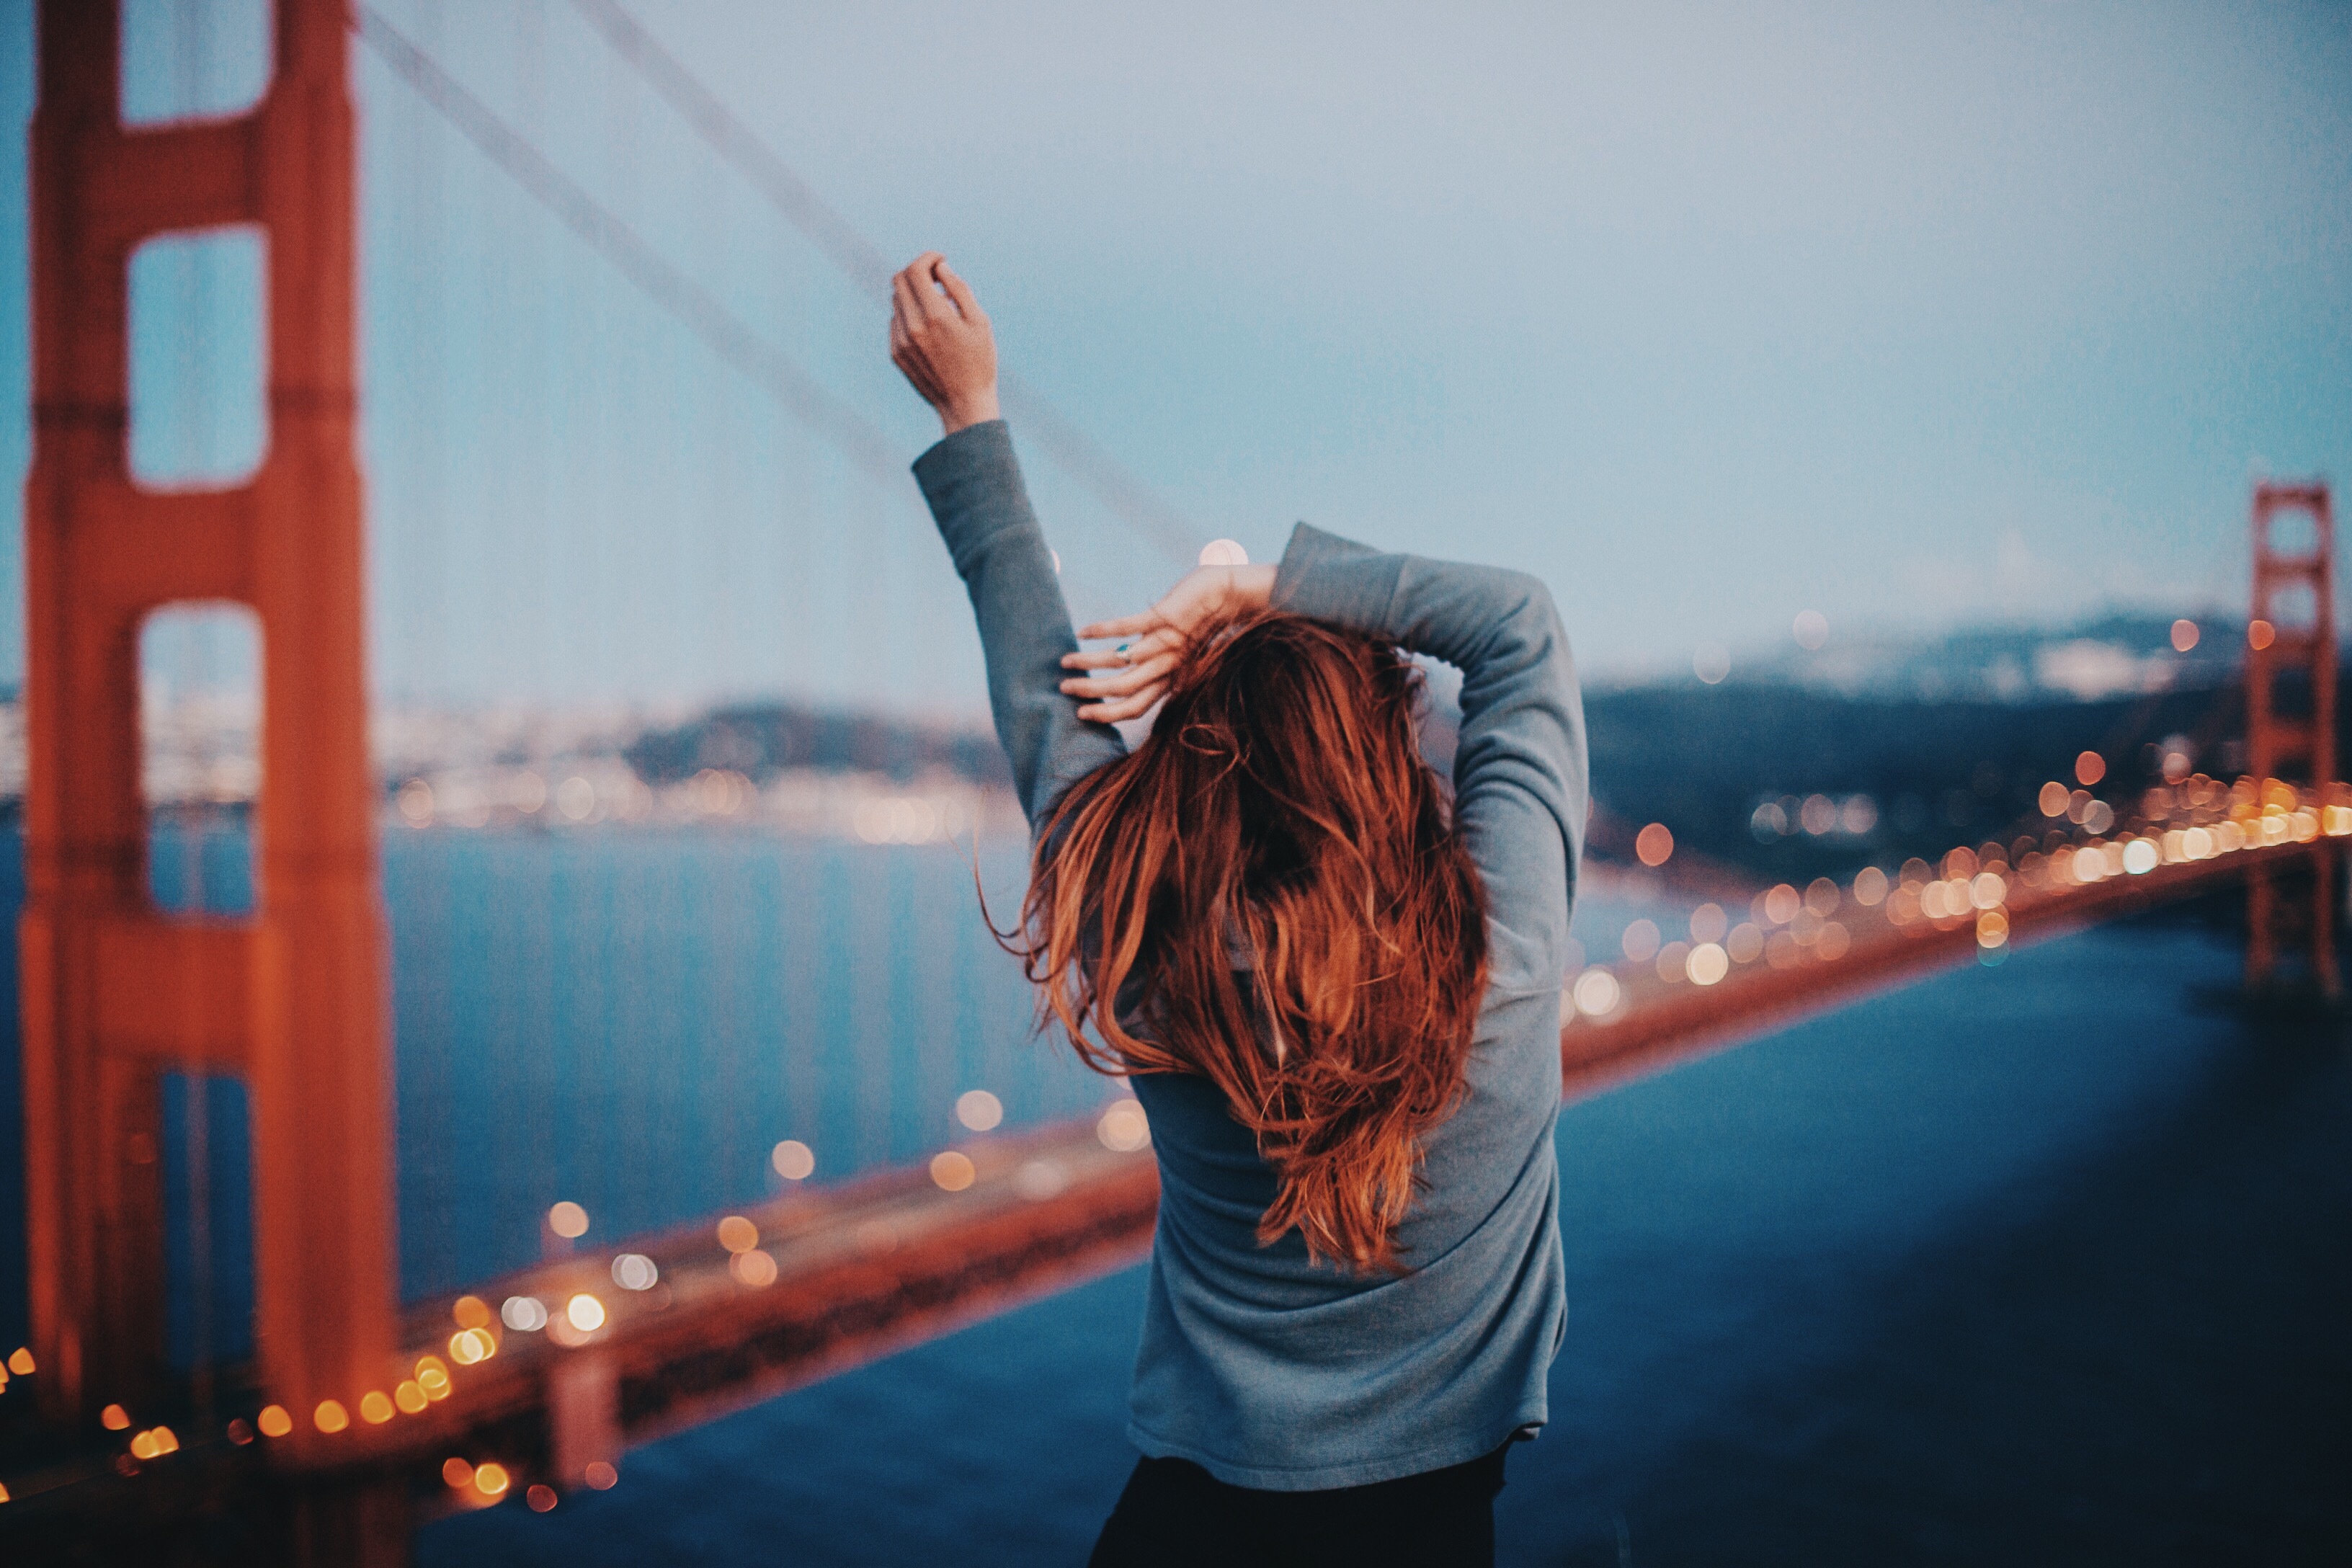 Woman poses in front of the Golden Gate Bridge in San Francisco, California.